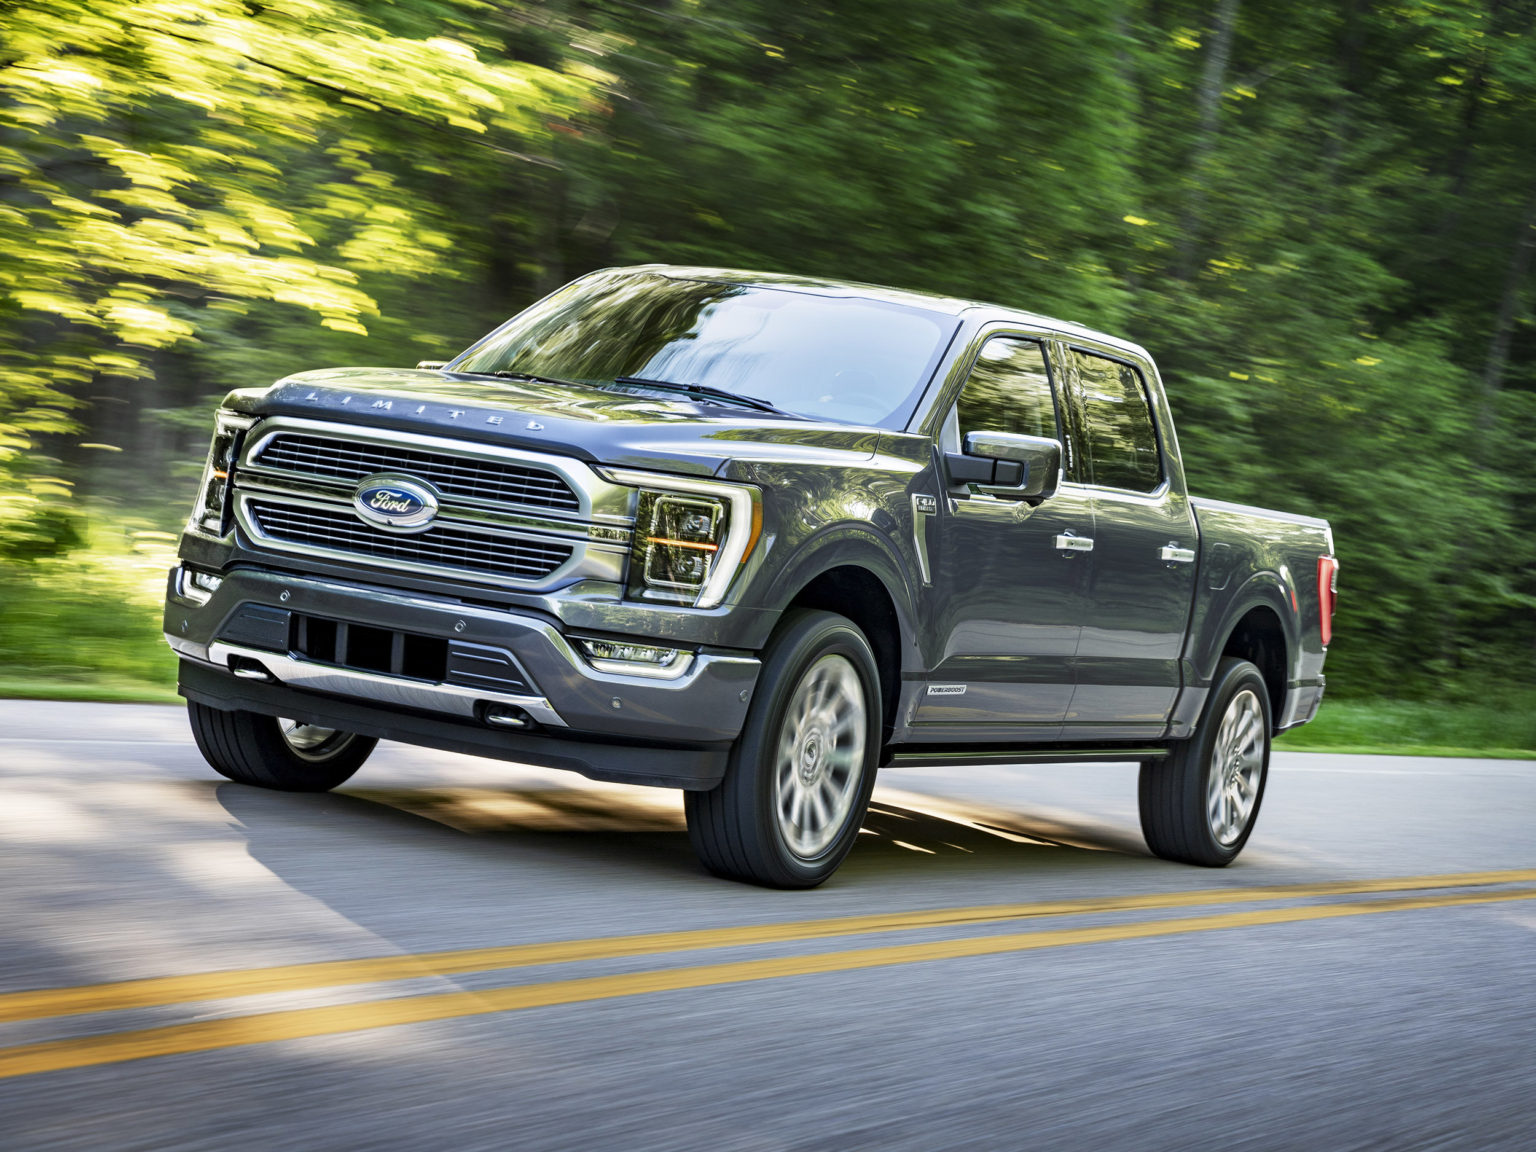 The F-150 has gotten an available hybrid power plant for 2021.